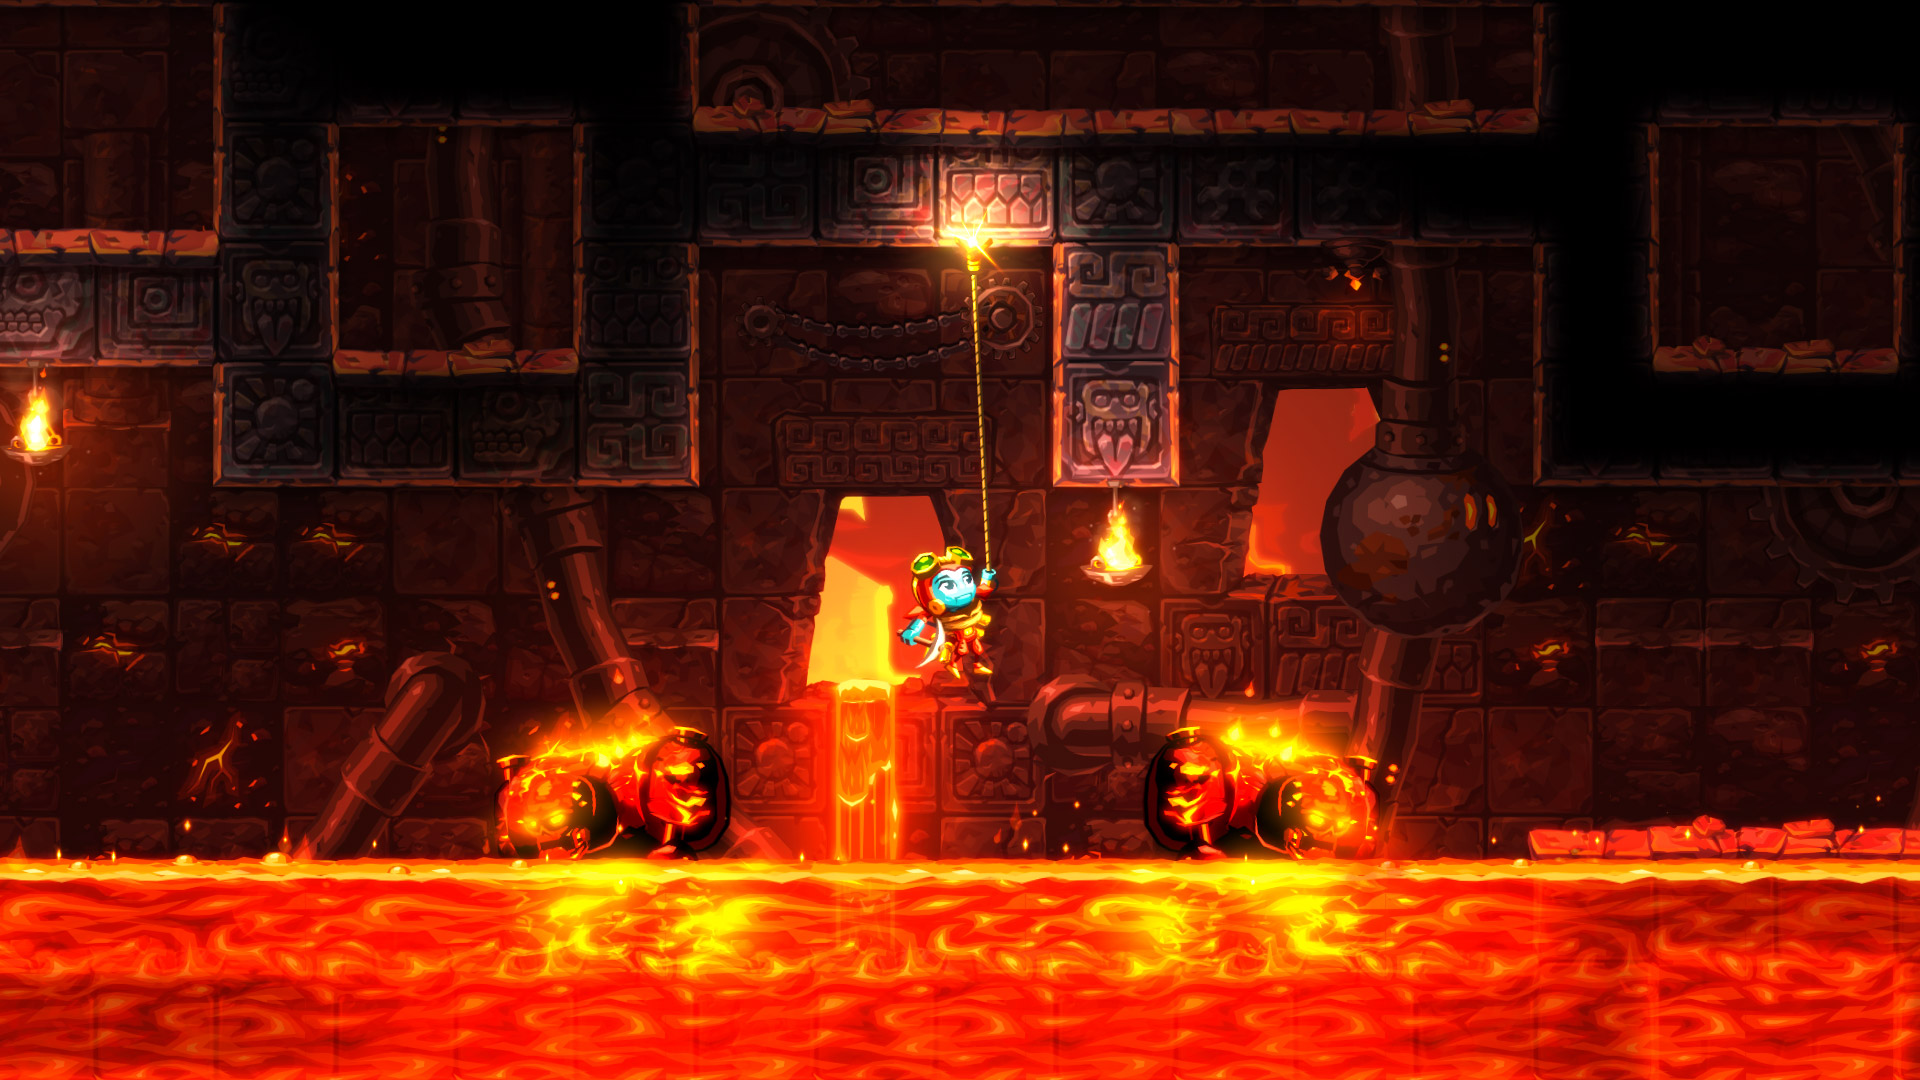 HD desktop wallpaper from SteamWorld Dig 2 featuring a character navigating through an underground lava-filled scene with ancient wall carvings.